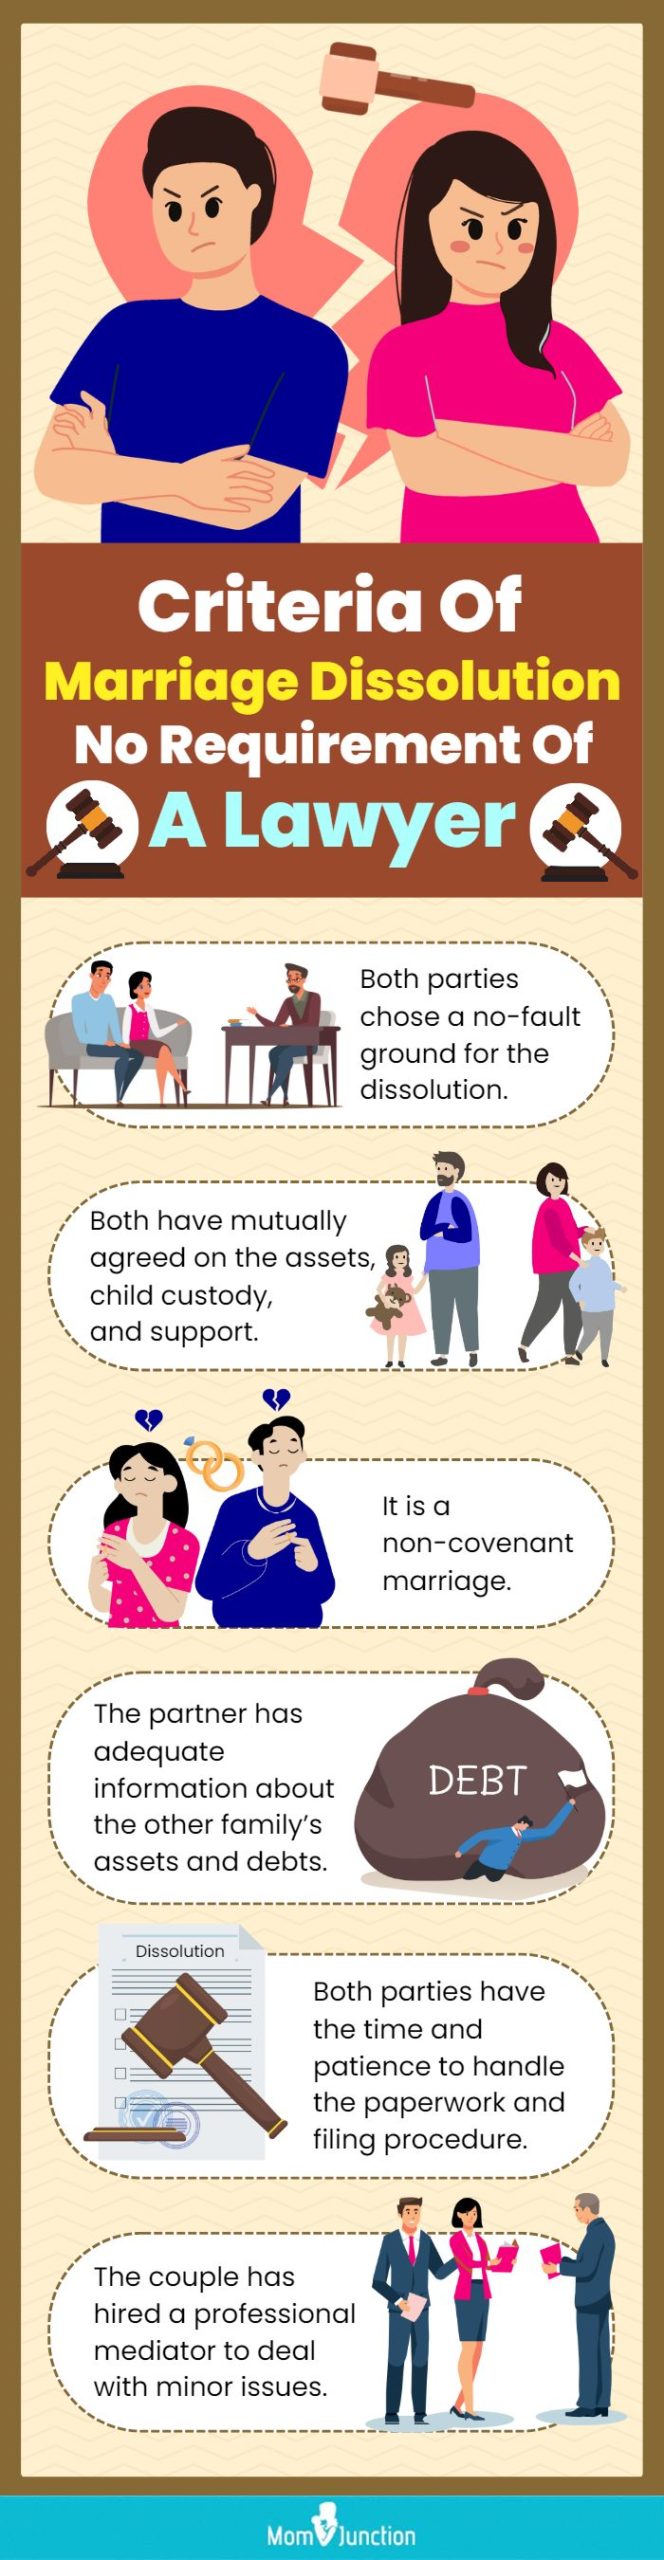 criteria of marriage dissolution with no requirement of a lawyer (infographic)